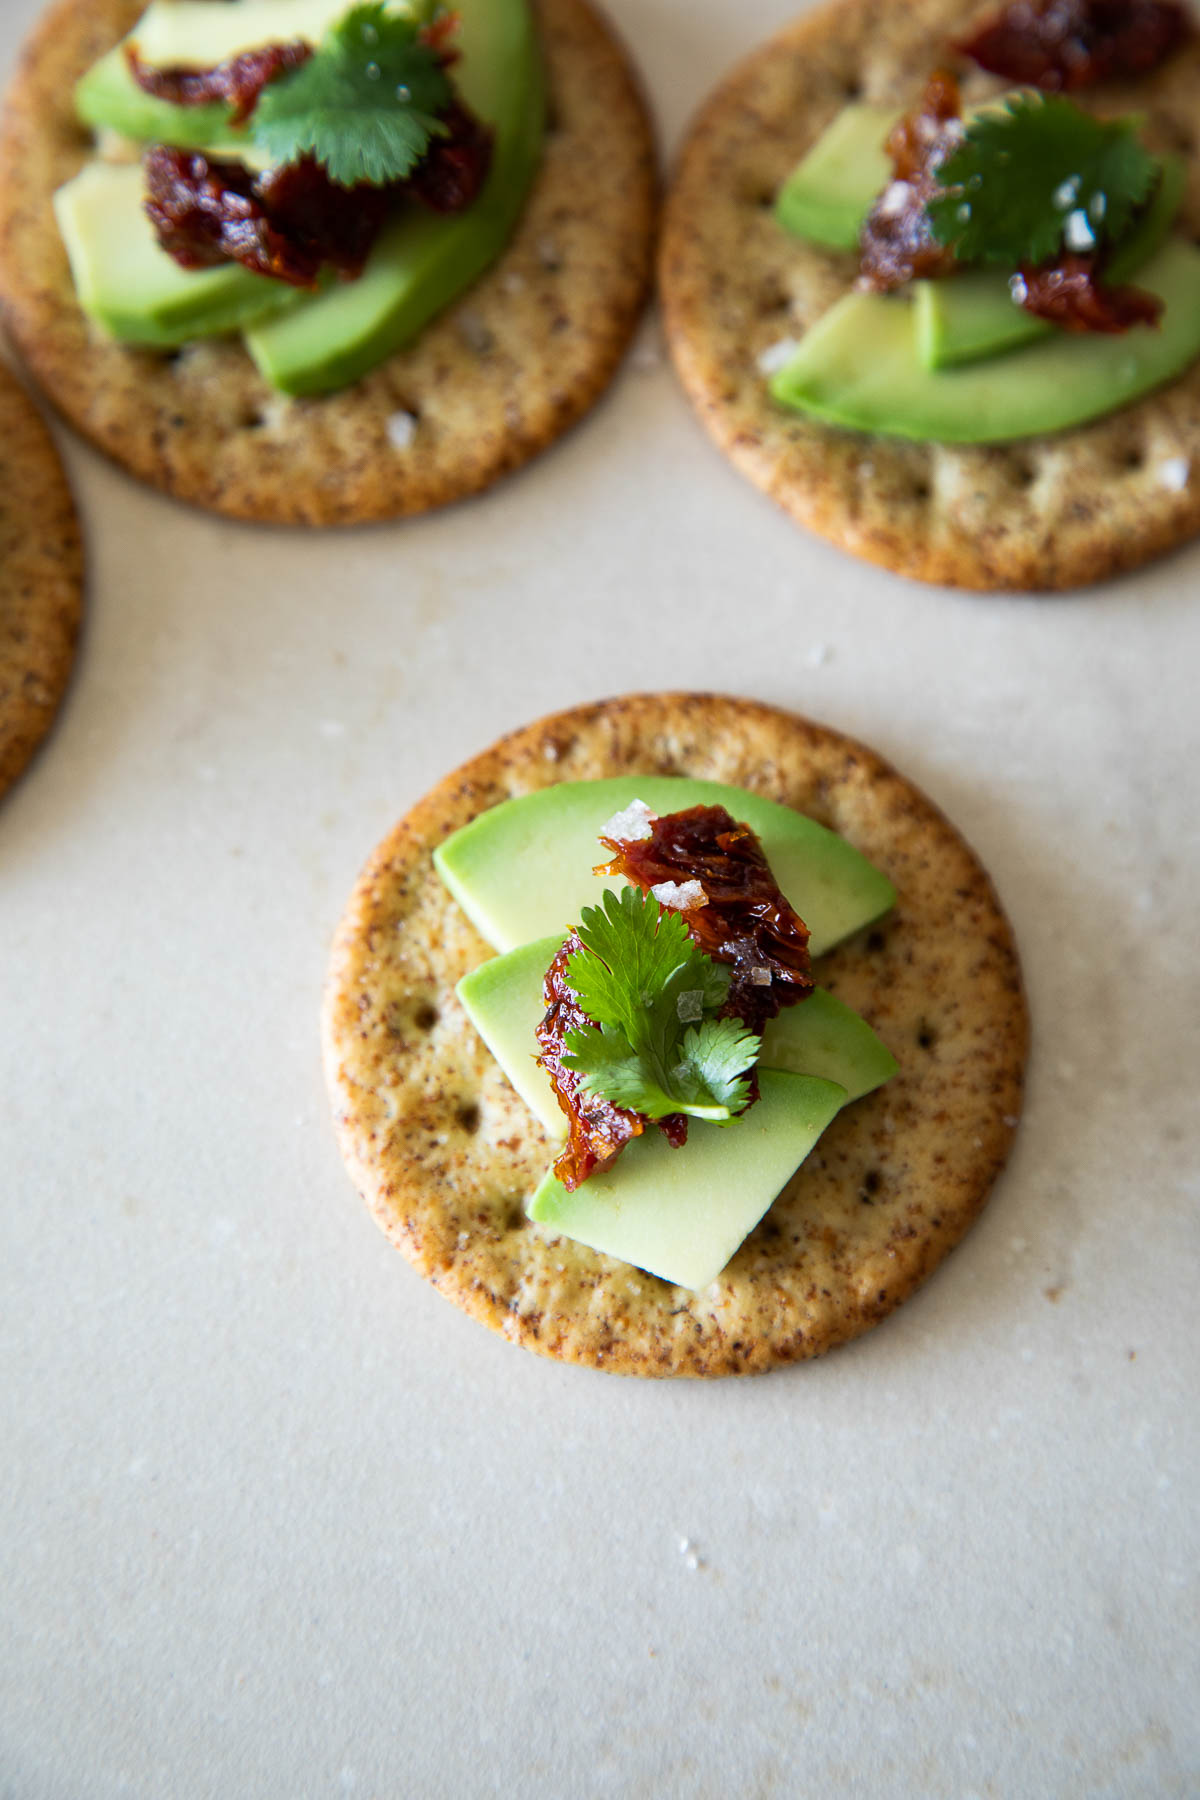 Avocado Crackers with Sun Dried Tomato, Cilantro Leaves, & Salt on Top